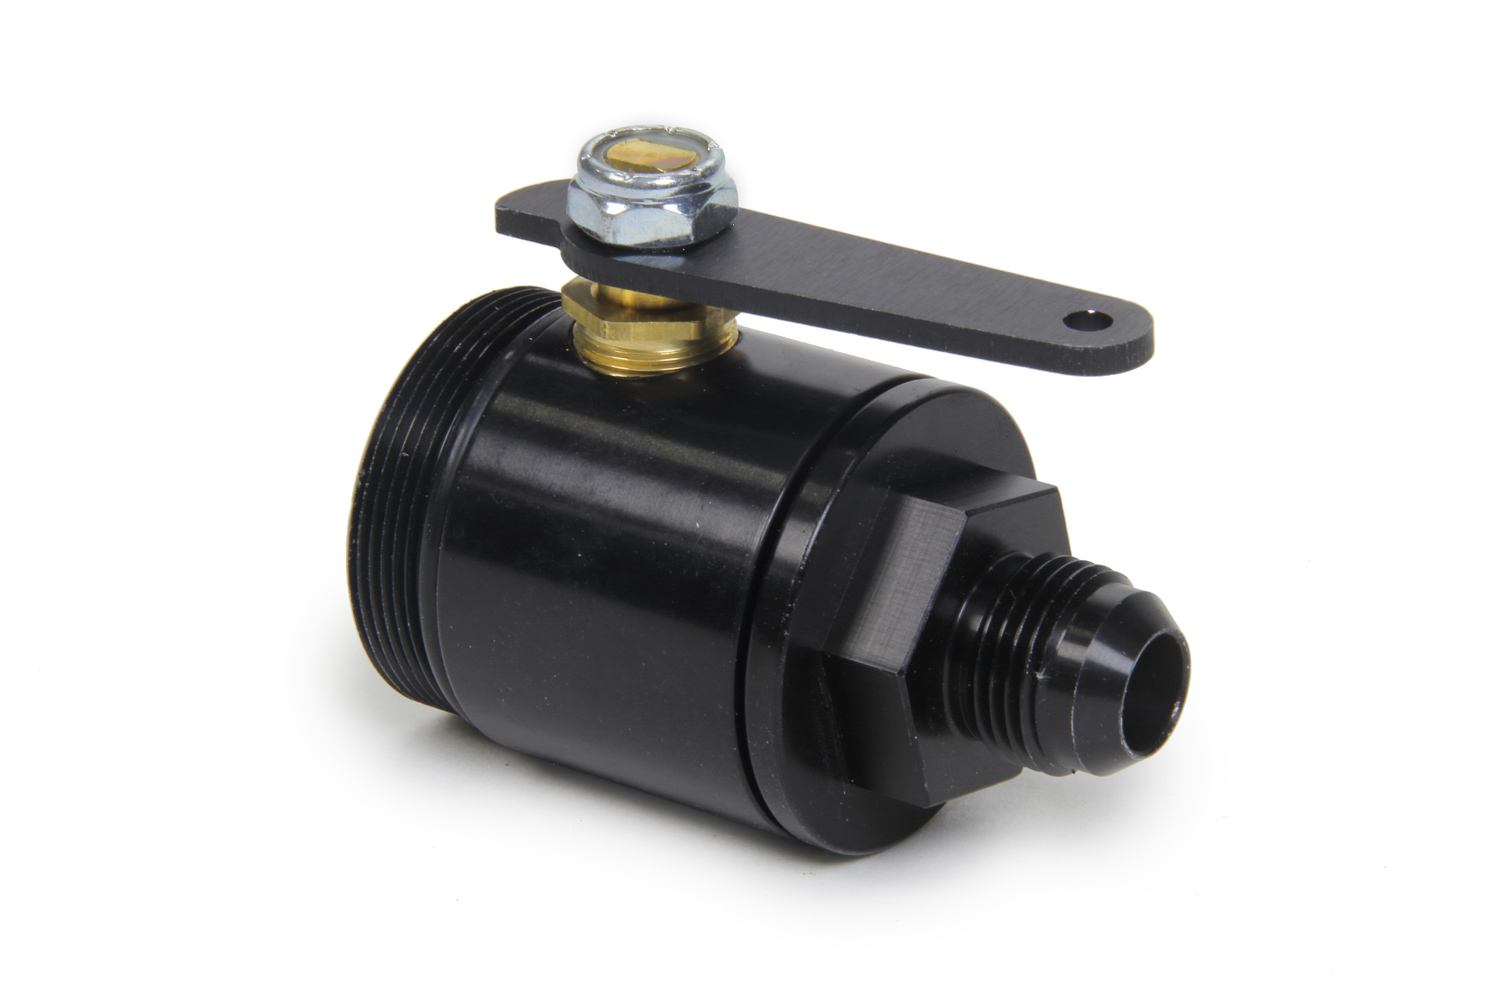 MPD Racing 73850 Shutoff Valve, Fuel Shutoff, In-Line, 10 AN Male Inlet, Aluminum, Black Anodized, MPD Fuel Filter, Each